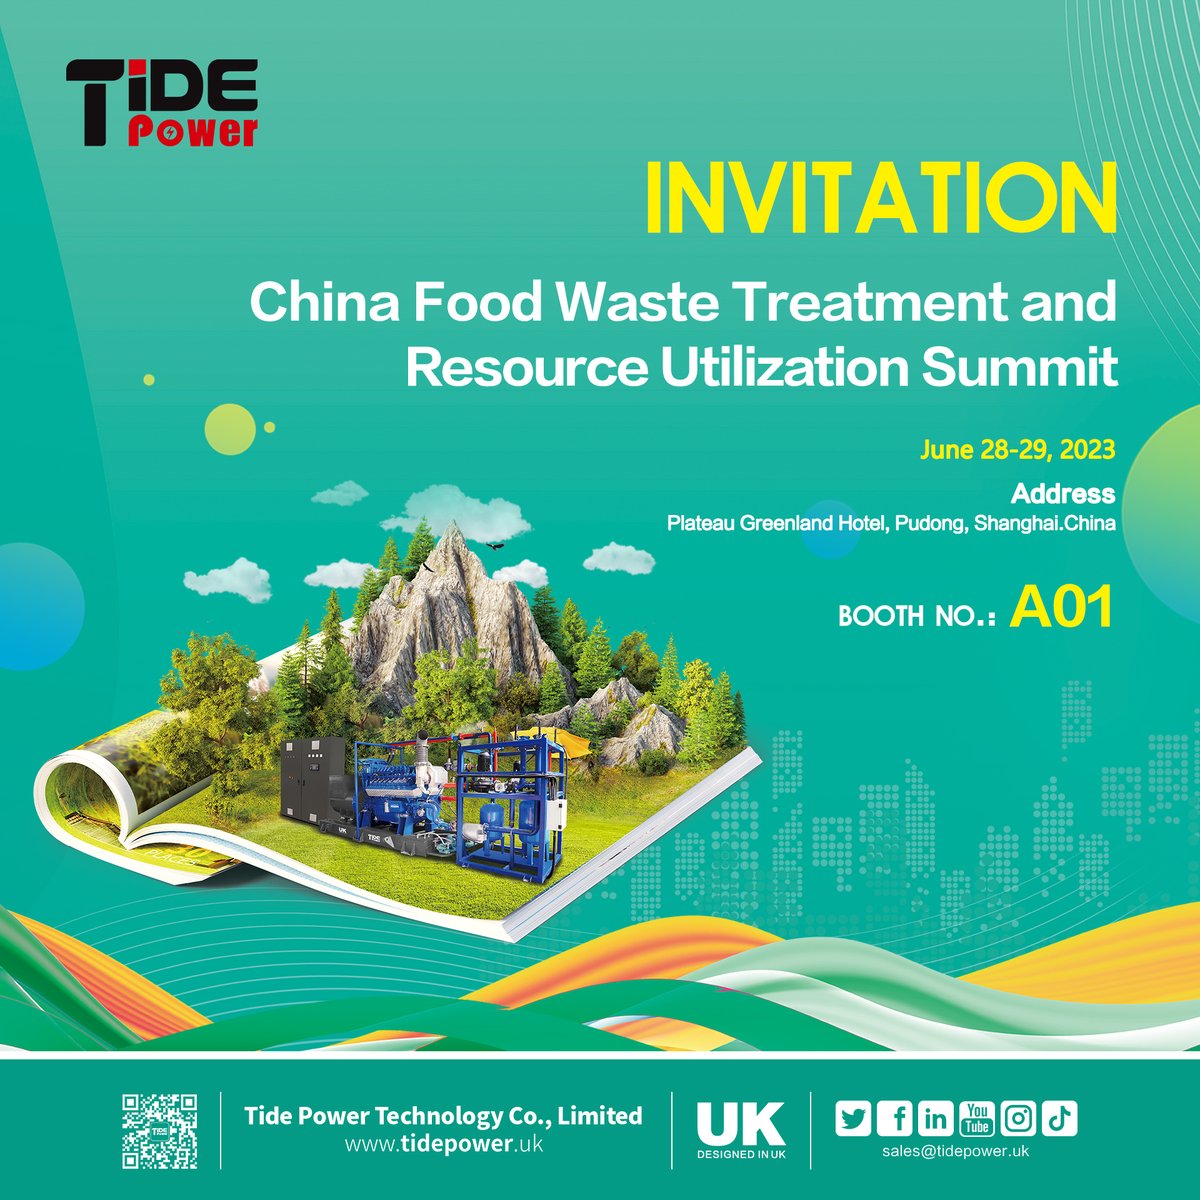 China food waste treatment and resource utilization summit is about to be held, and #TidePower looks forward to your visit to booth A01 to jointly explore green and #lowcarbon development. #FWS2023 #MWM #engine #powersolution #resource #biogas #gas #electricity